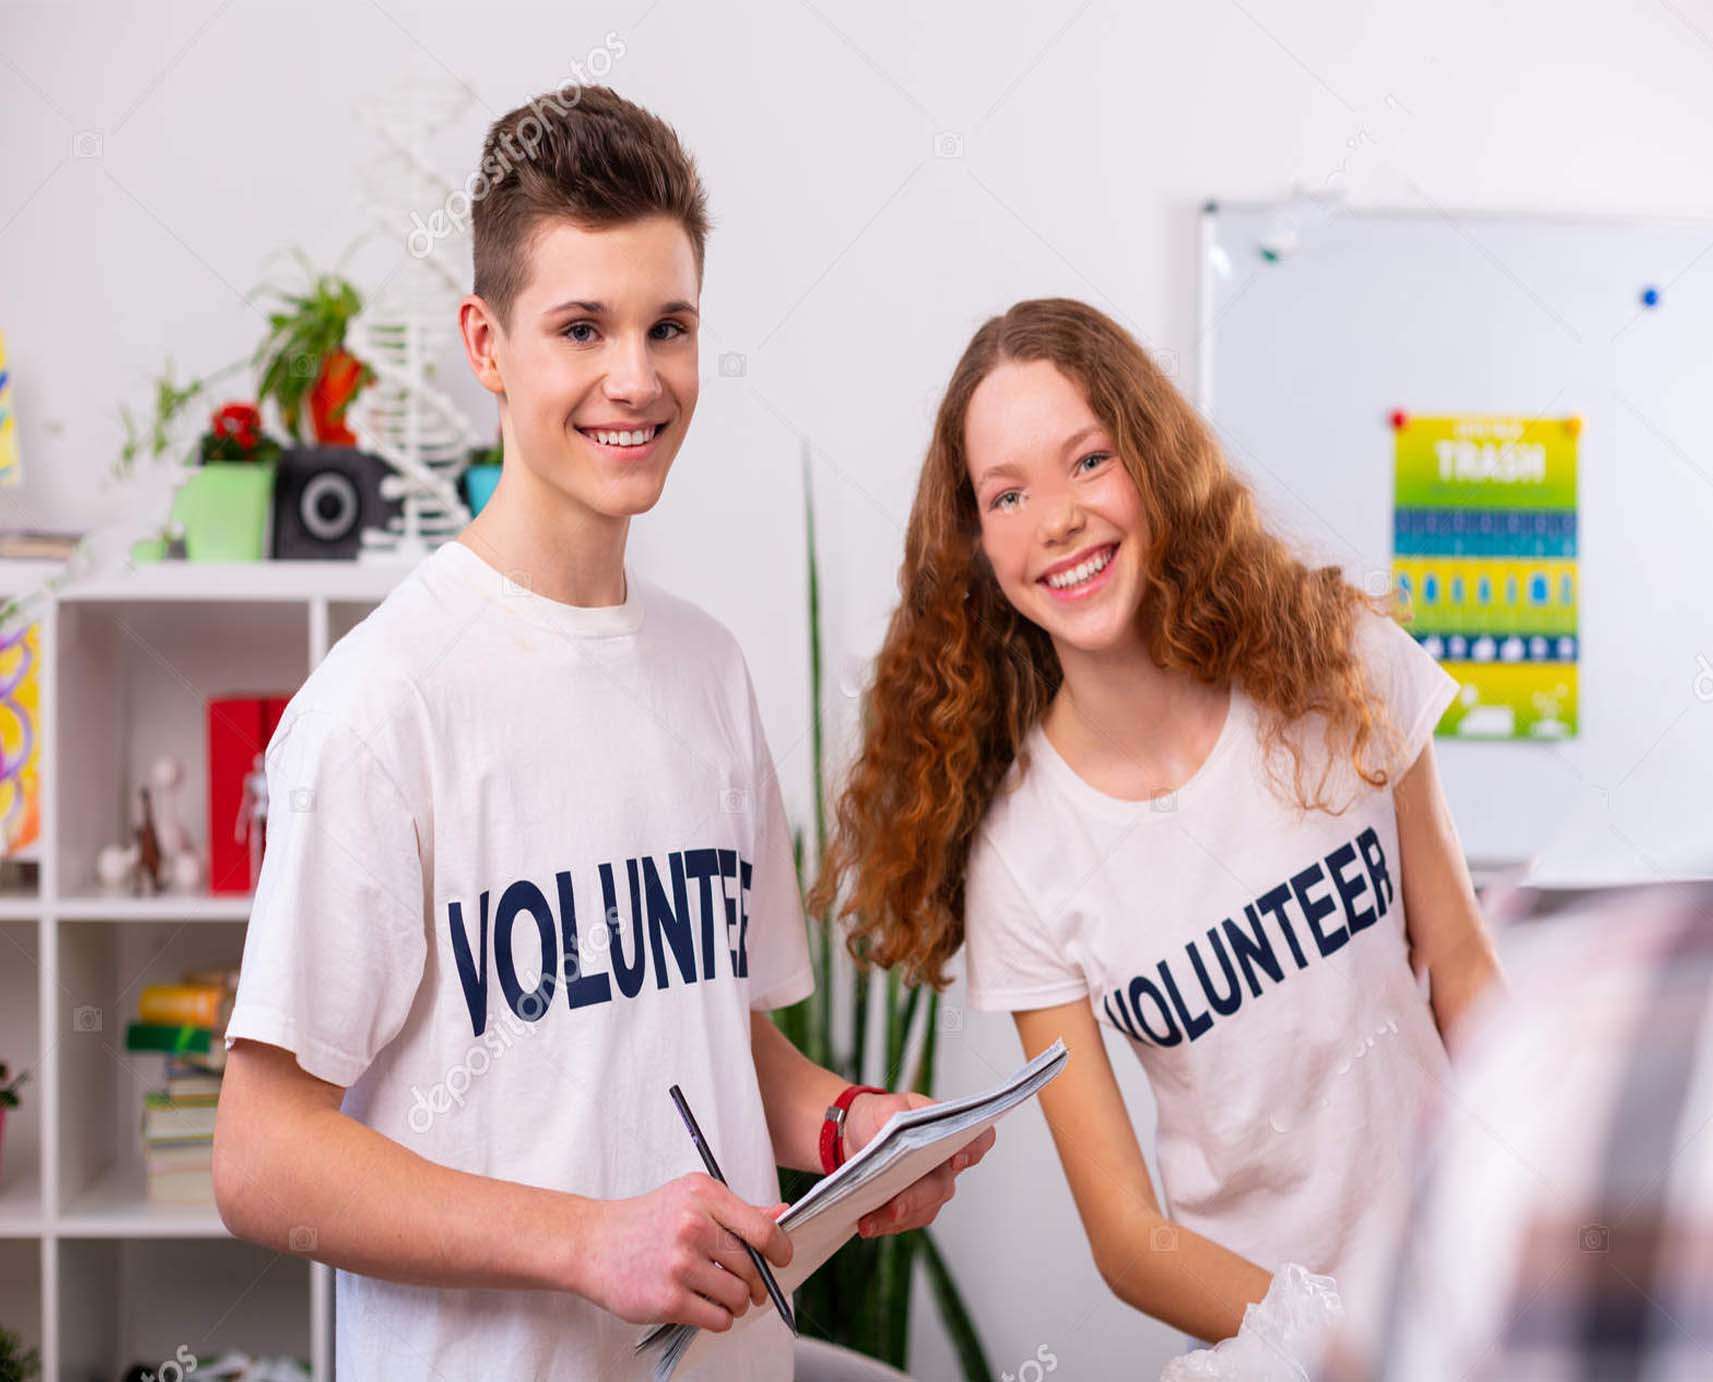 The Tips on Finding and Keeping Event Volunteers